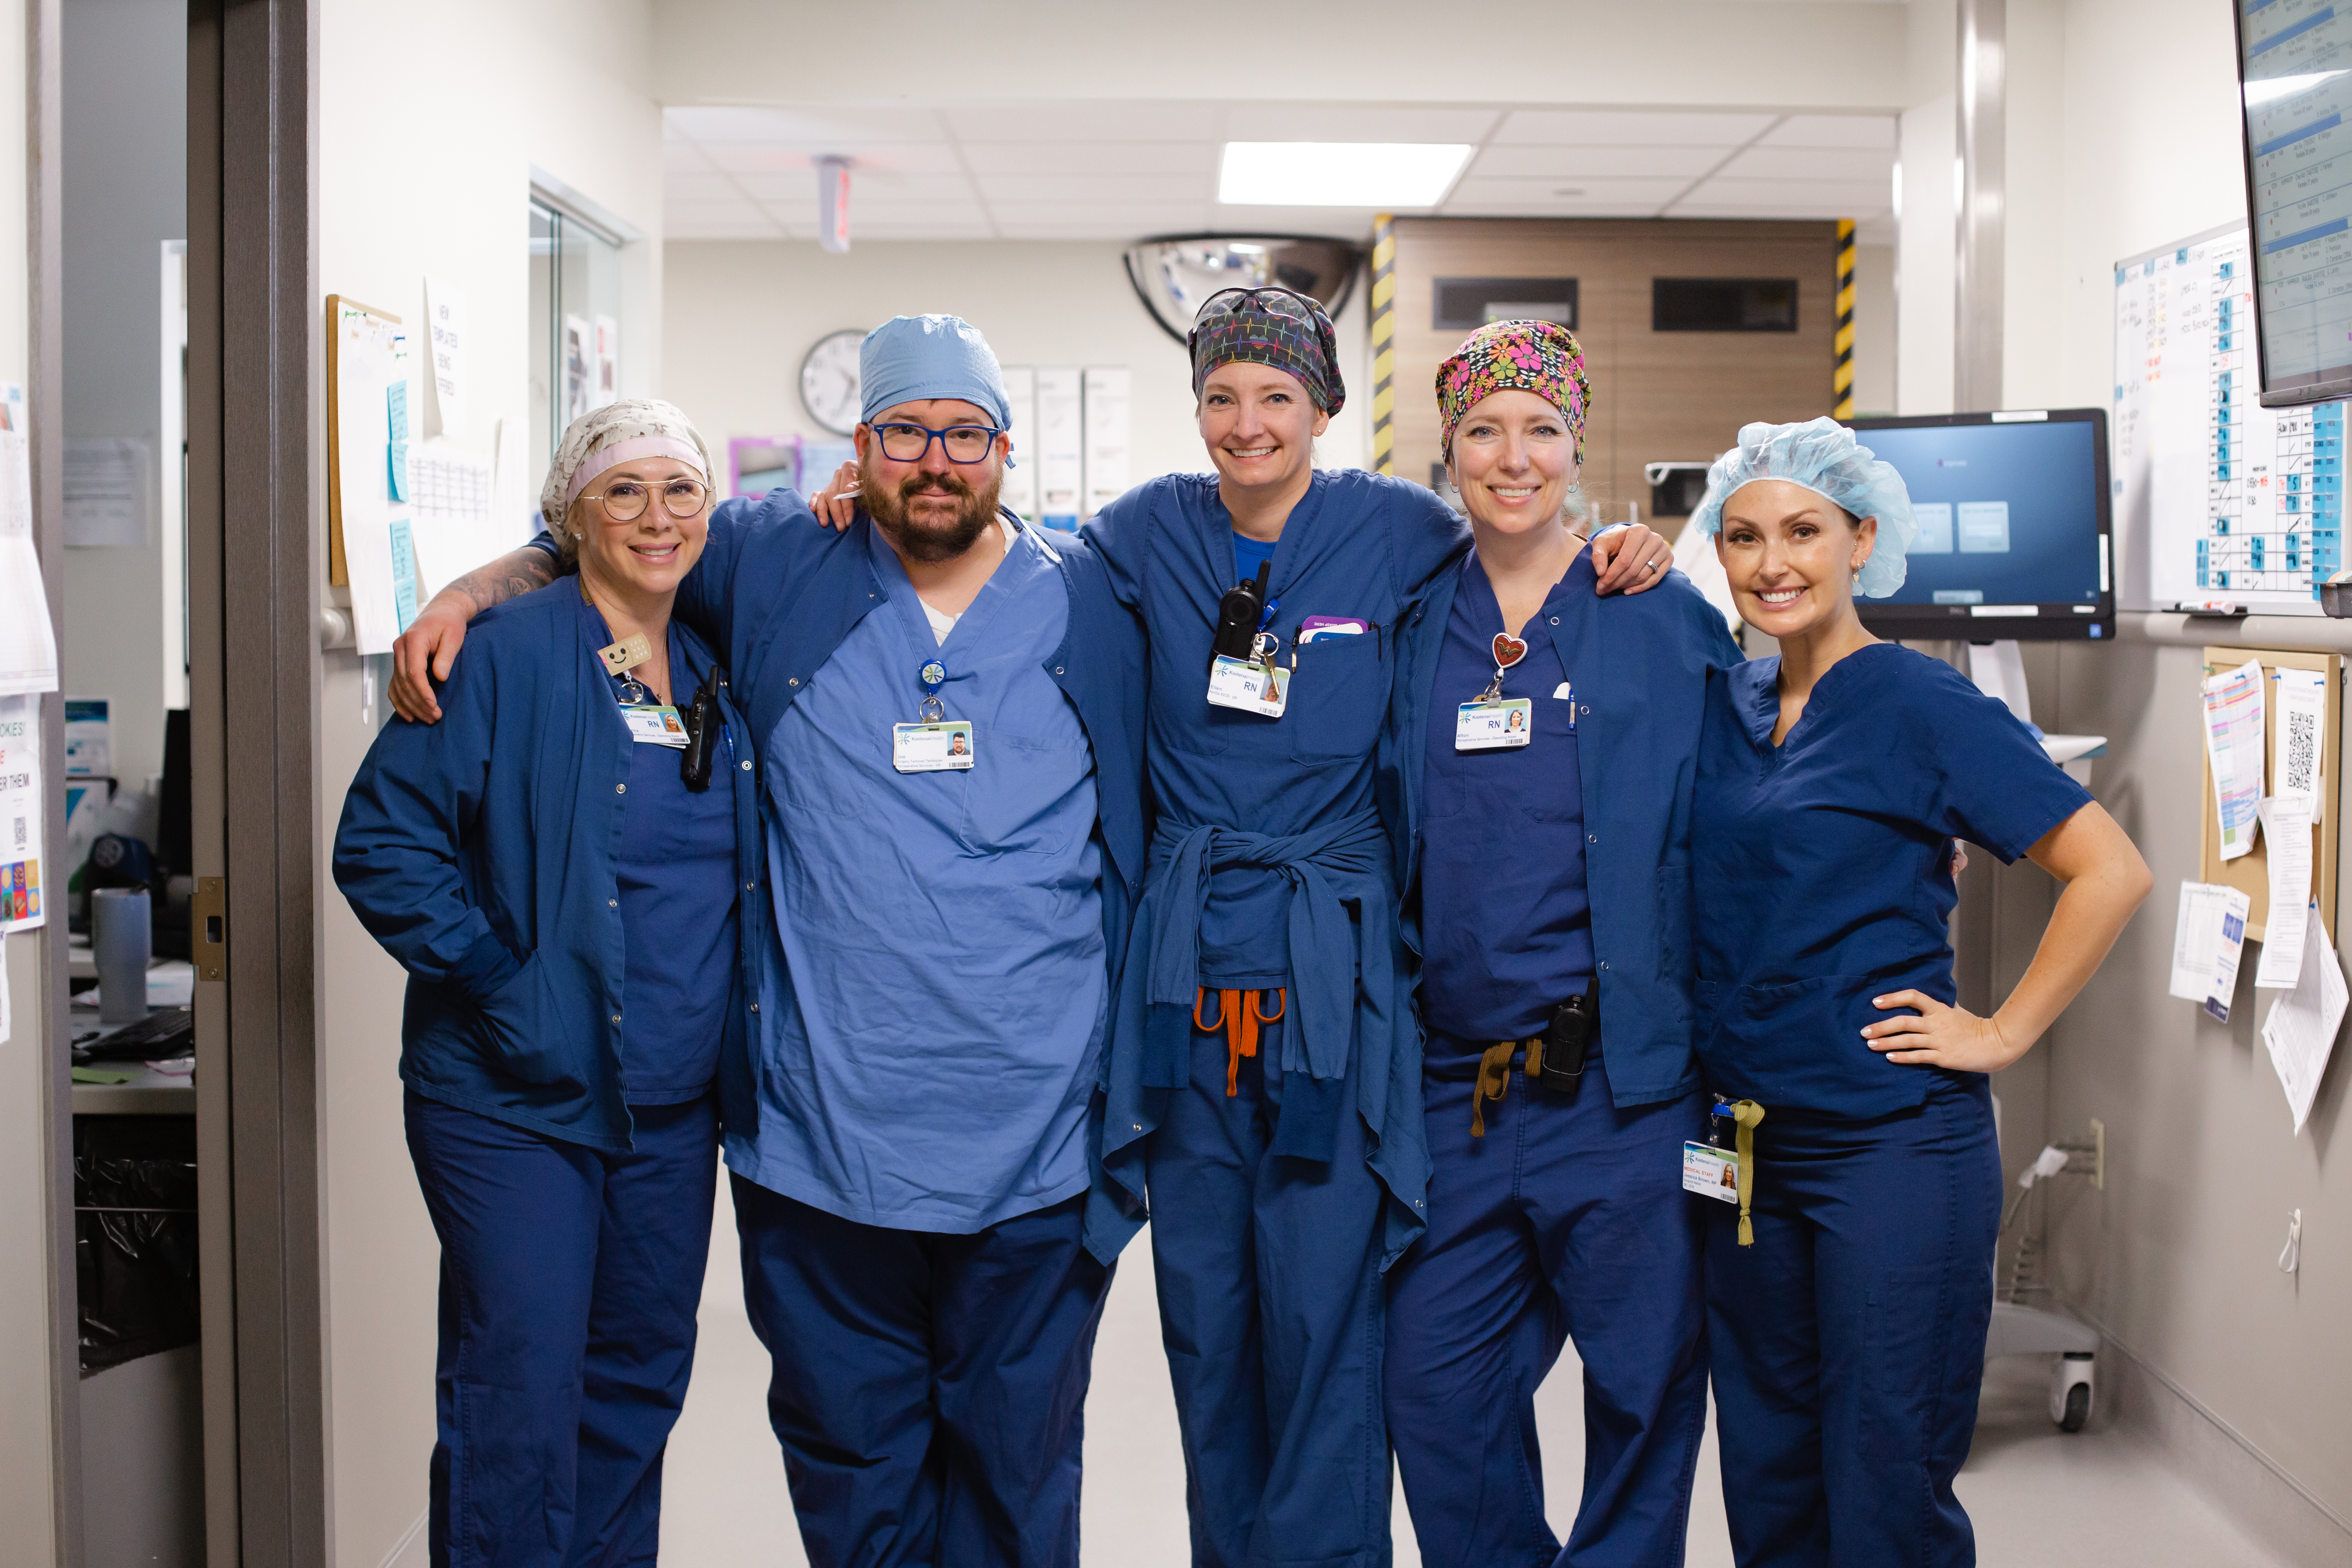 5 nurses in blue scrubs stand together with arms around each other